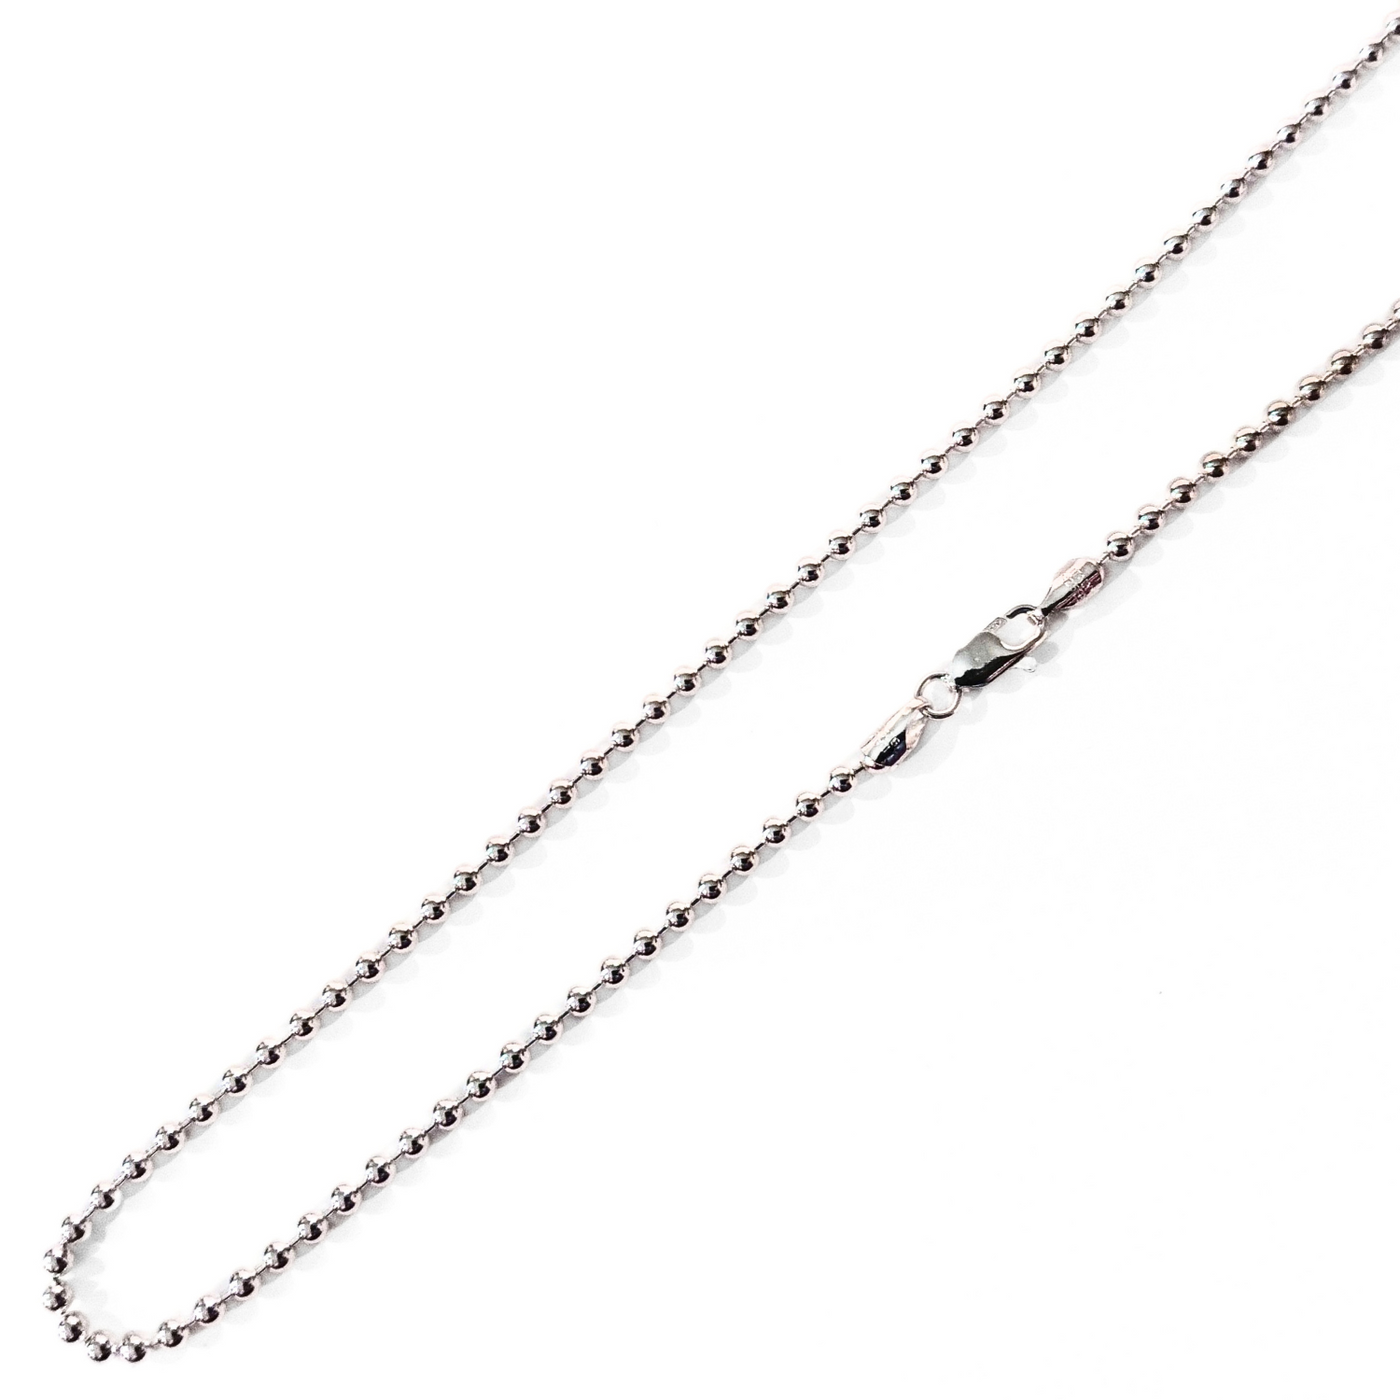 20" 3.0mm Bead Chain (Sterling Silver)